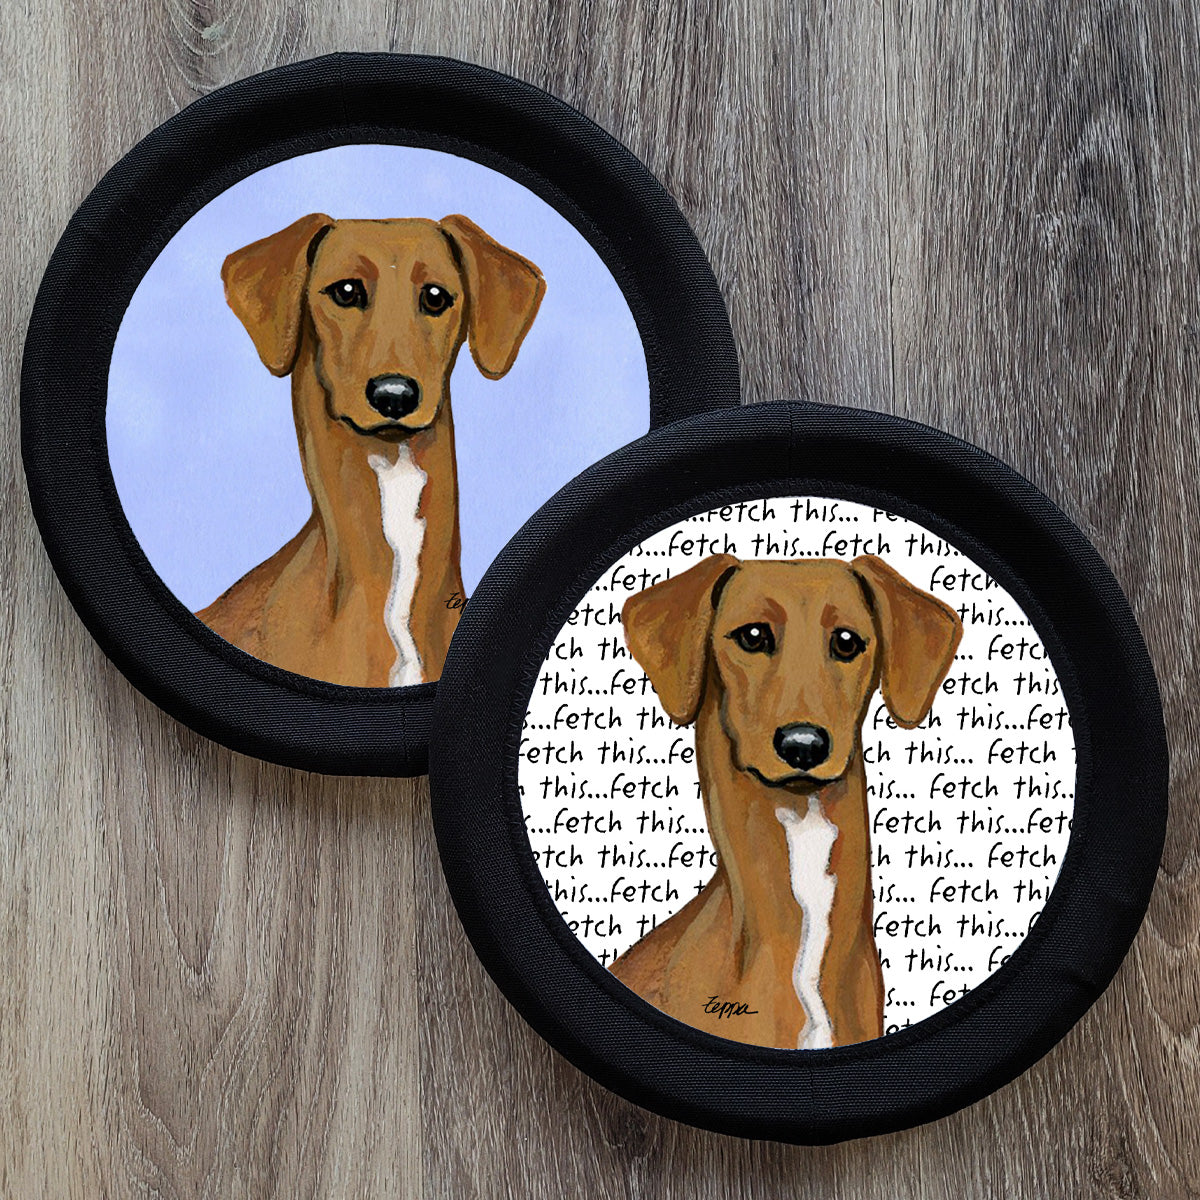 Two FotoFrisby Flying disc dog toys with an image of anAzawakh